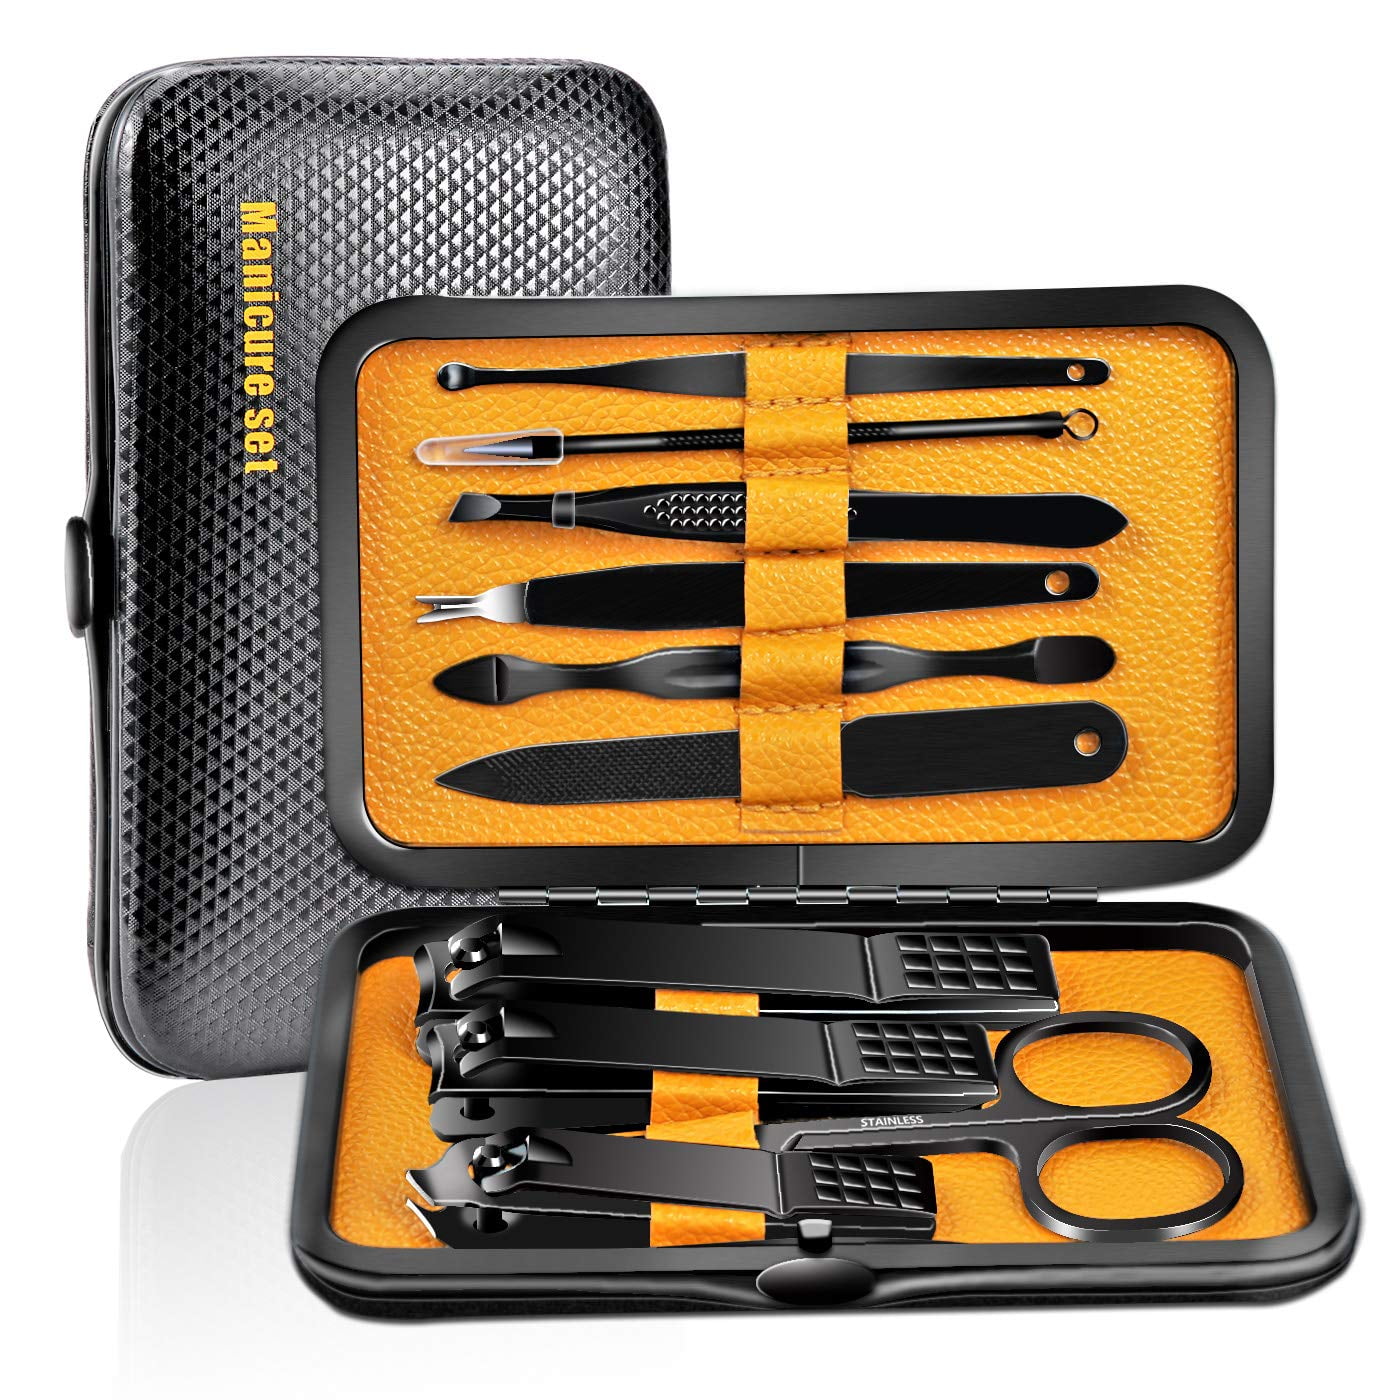 Manicure Set Nail Clippers Kit 10 Pieces Stainless Steel Professional Grooming Kit Tools (Black/Yellow) - Walmart.com